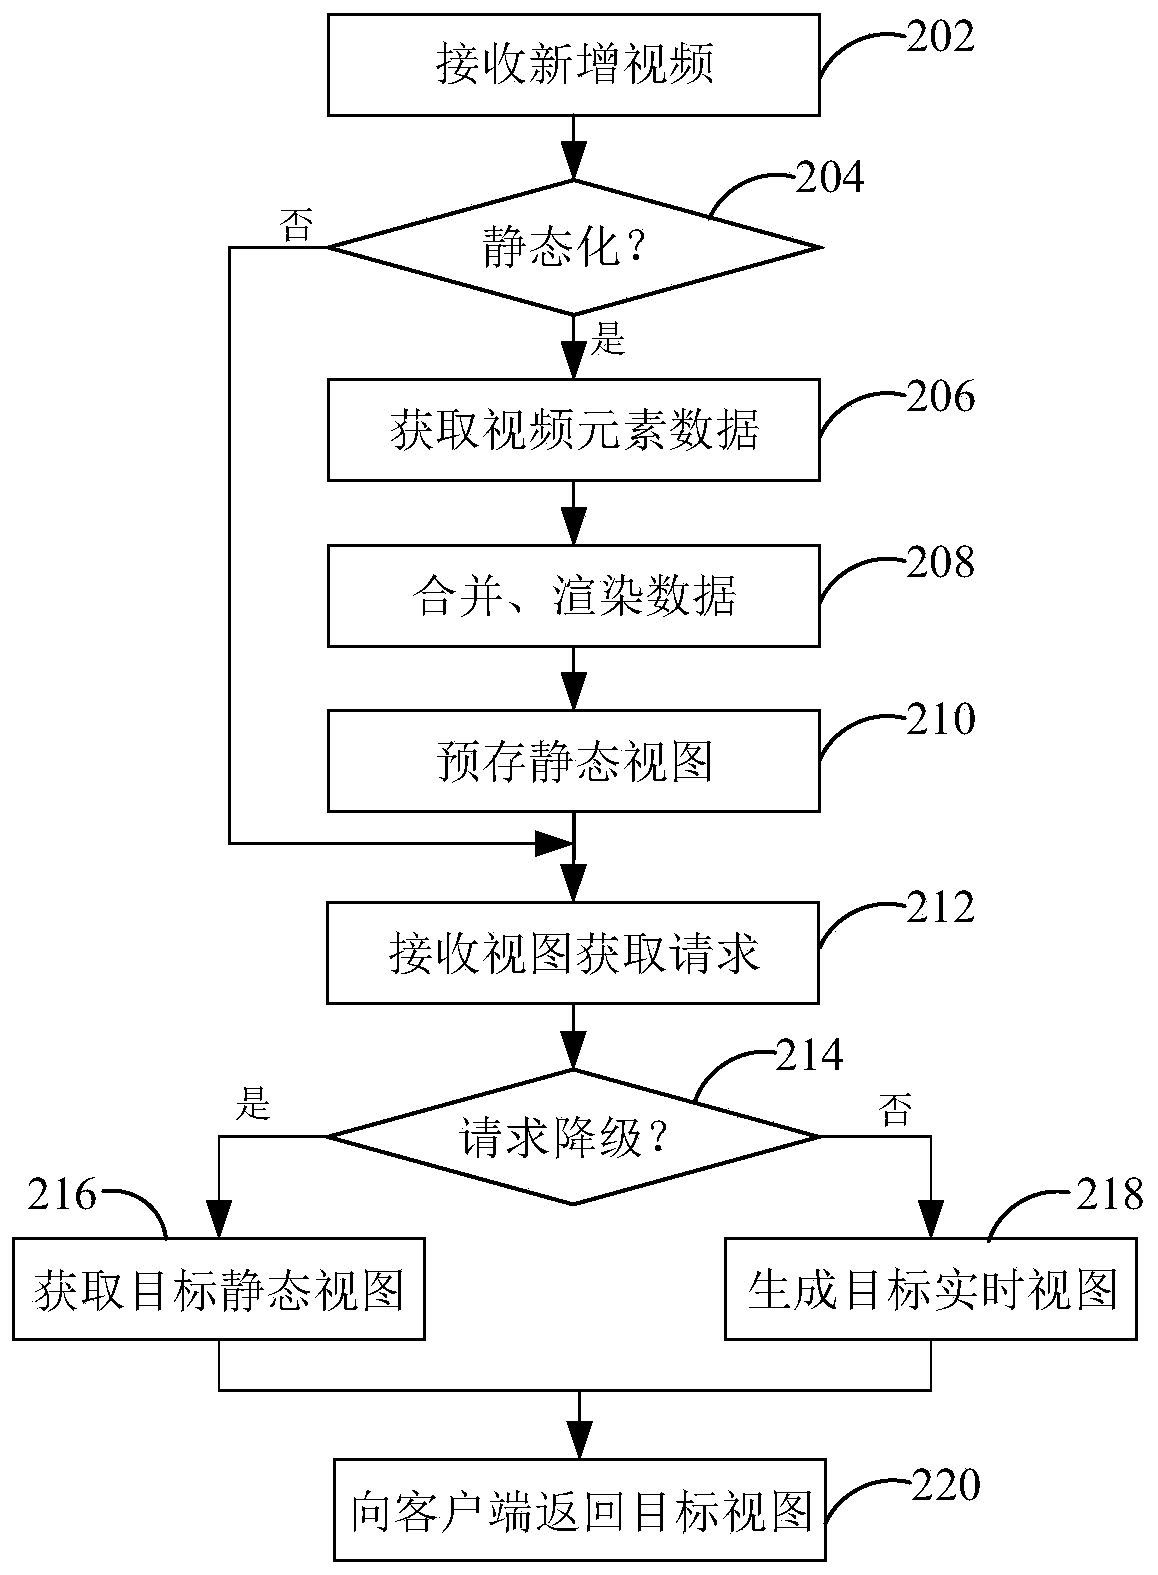 Video service providing method and device, electronic equipment and storage medium